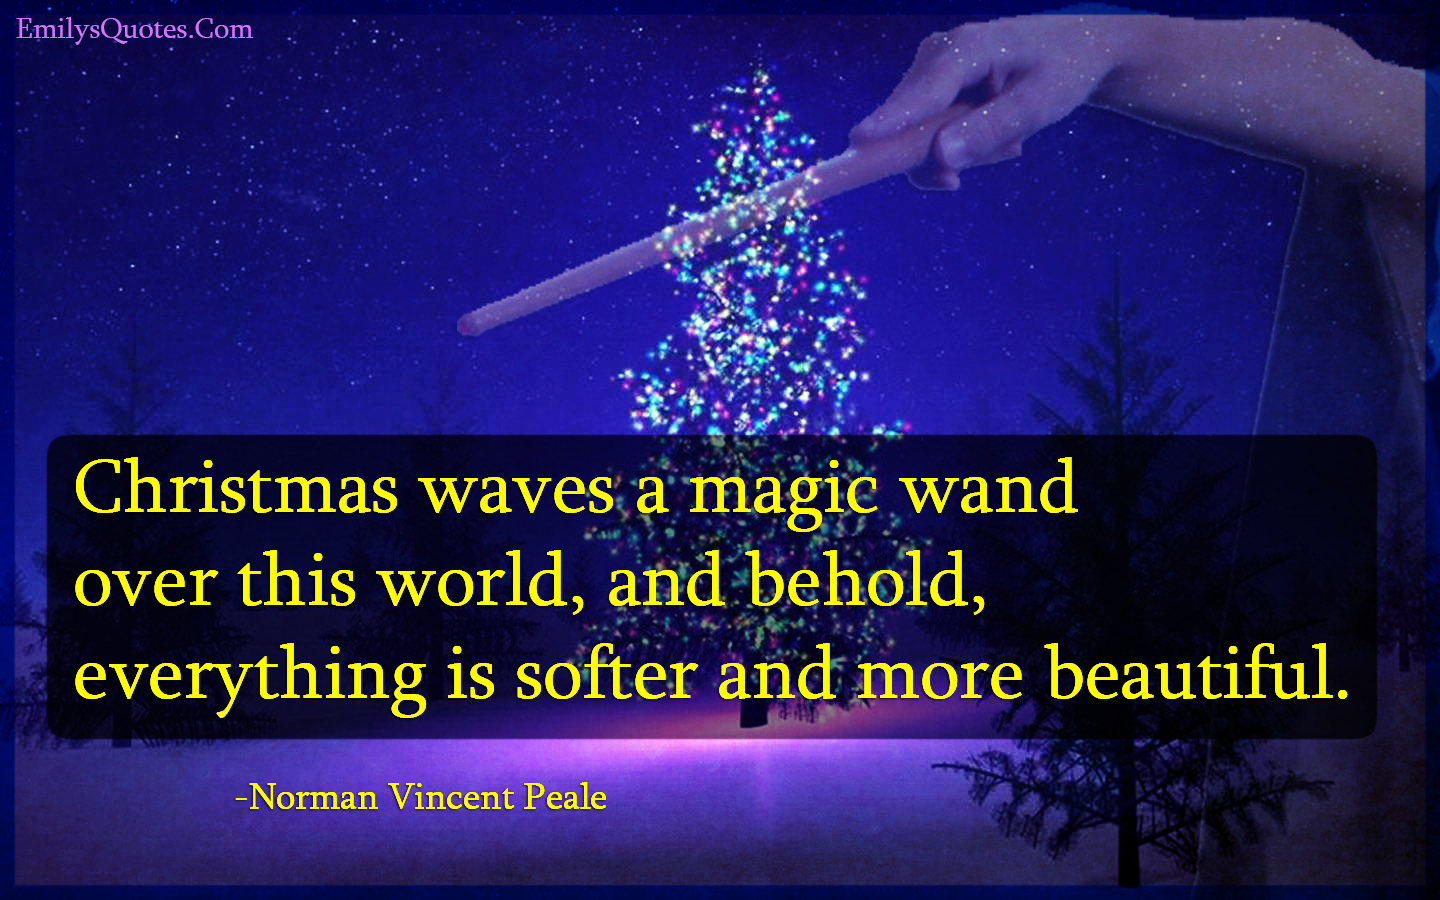 Christmas waves a magic wand over this world, and behold, everything